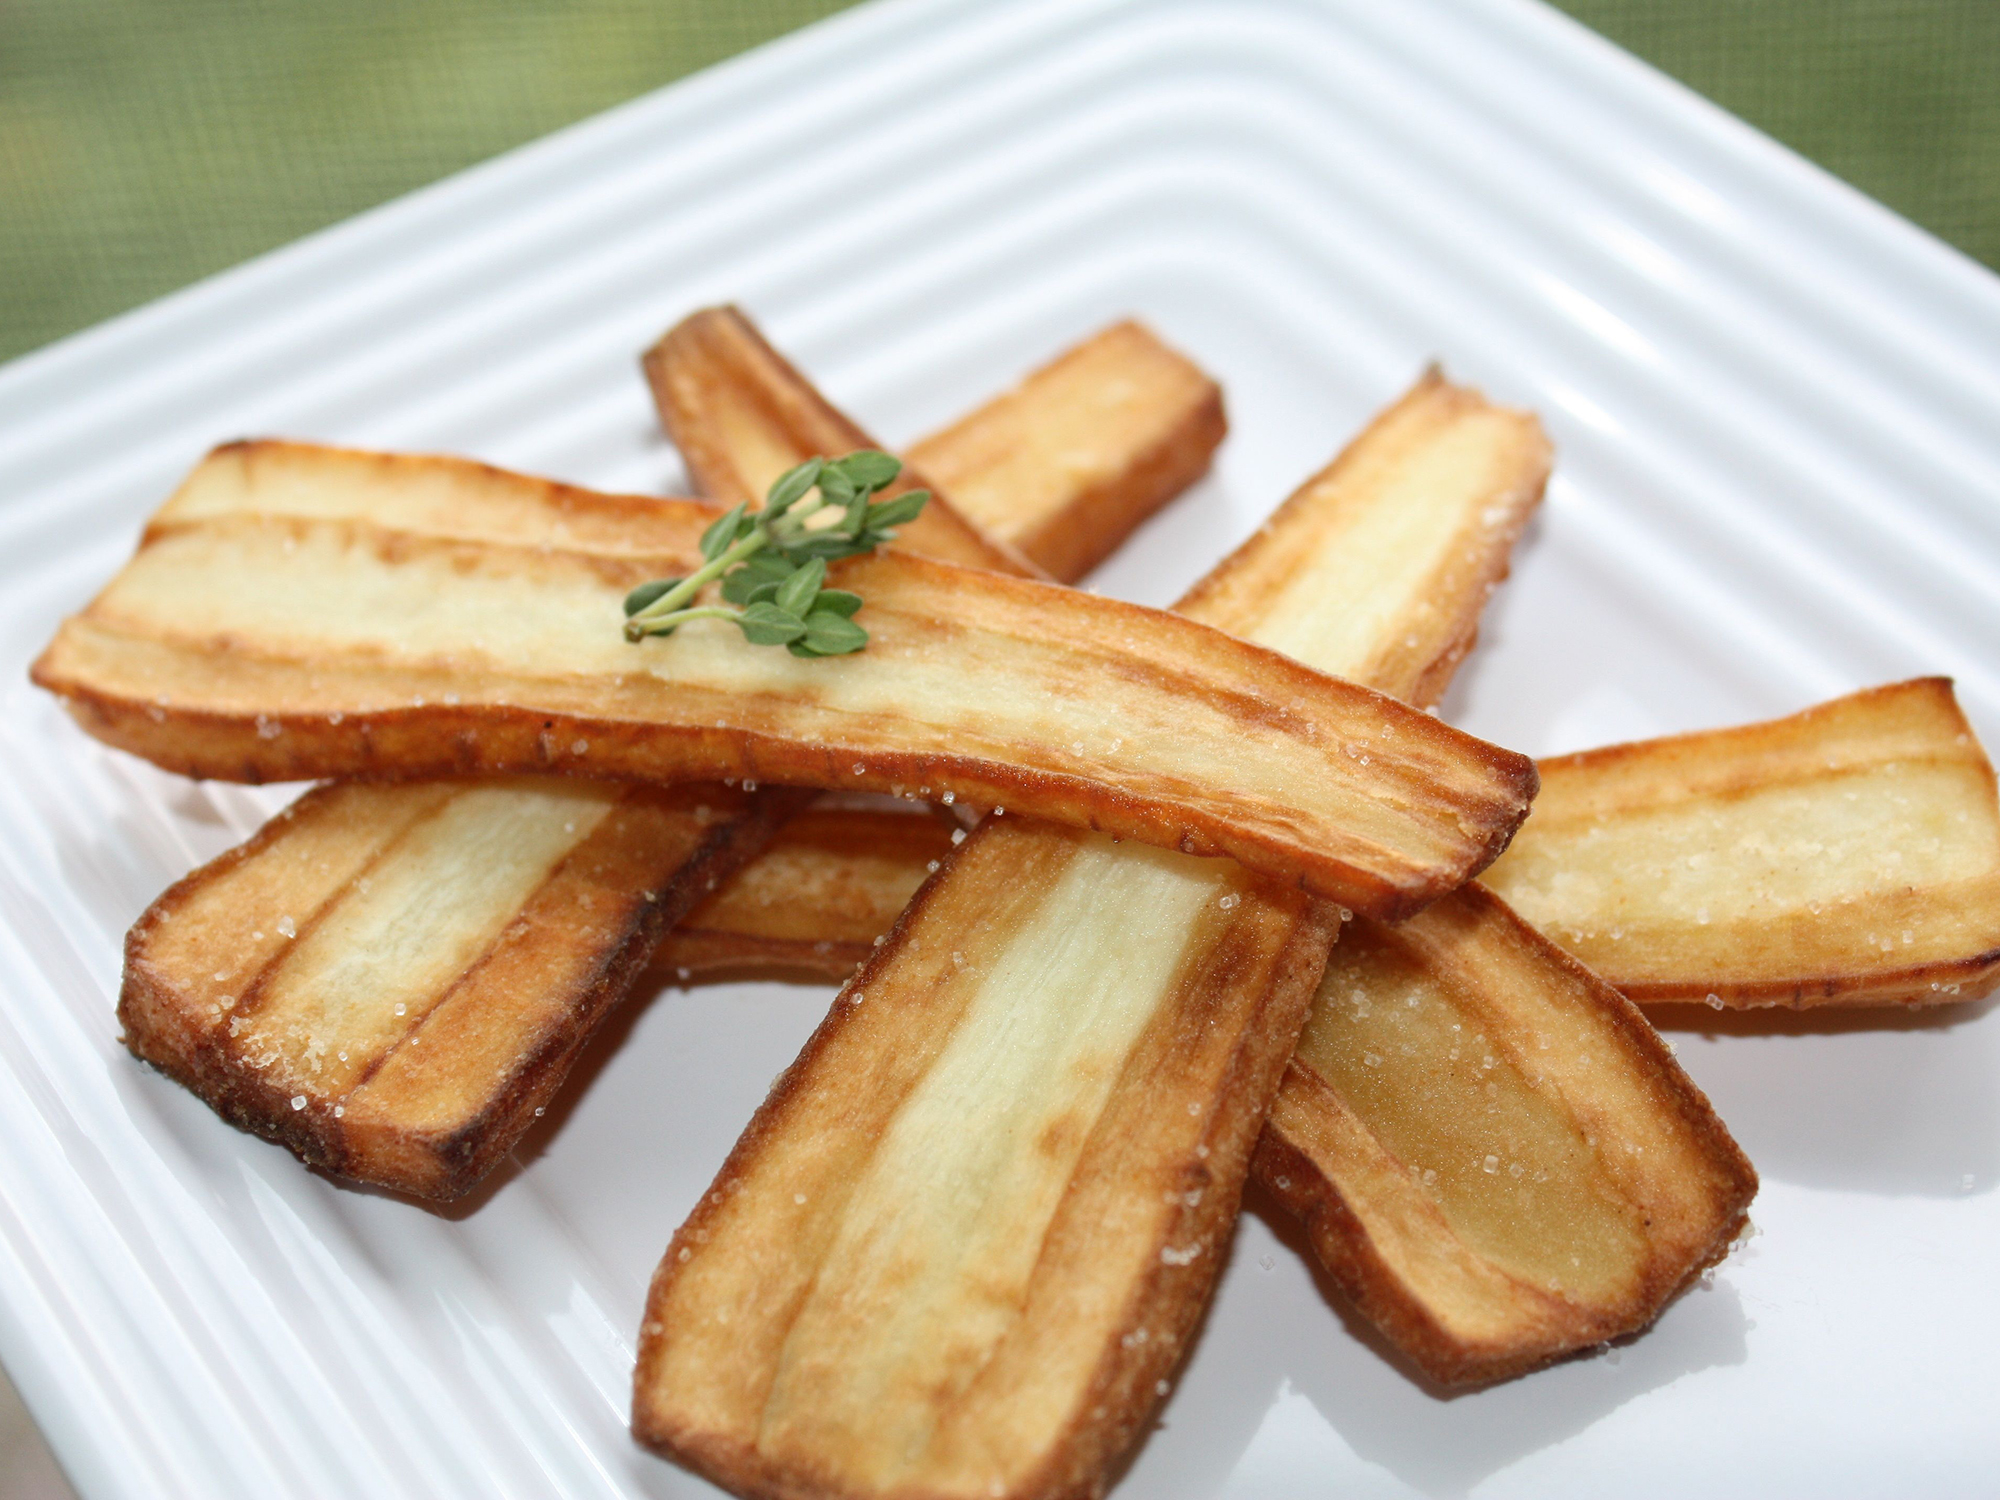 close up view of Butter Fried Parsnips garnished with fresh herbs on a white plate